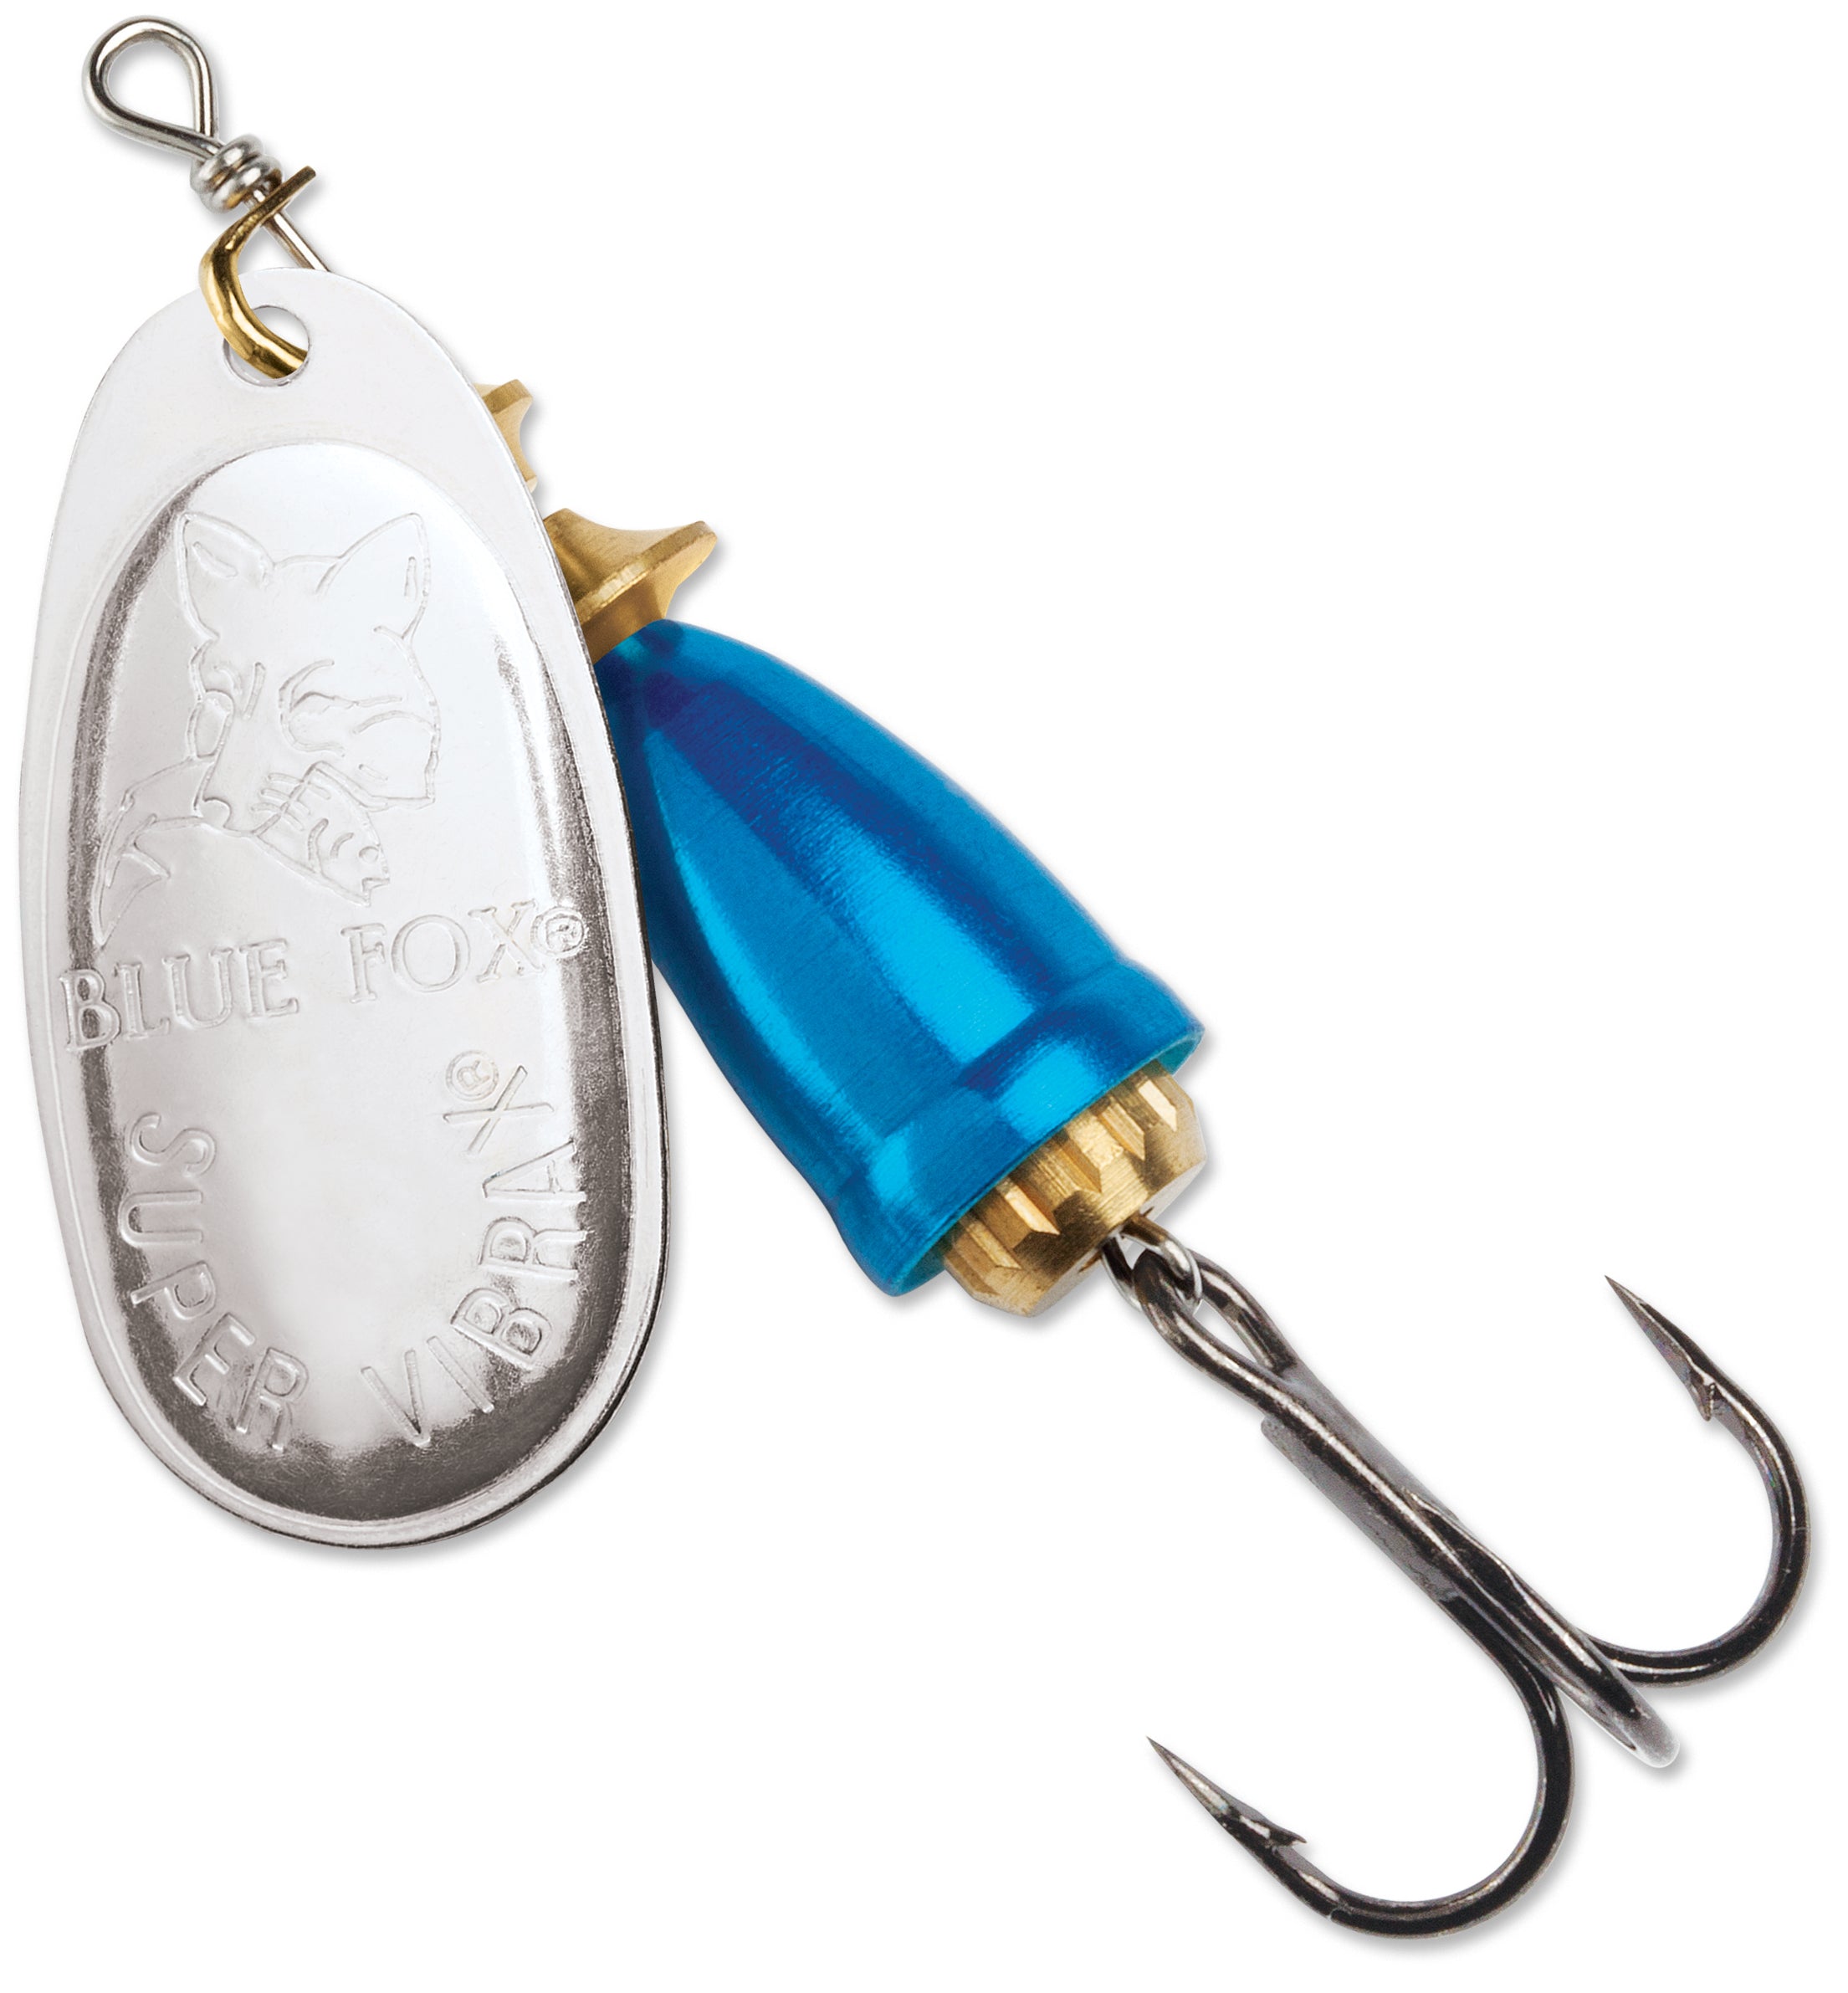 Blue Fox Classic Vibrax 05 Painted 7/16 (Silver/Fluor Red , Size- 5) :  Fishing Spinners And Spinnerbaits : Sports & Outdoors 